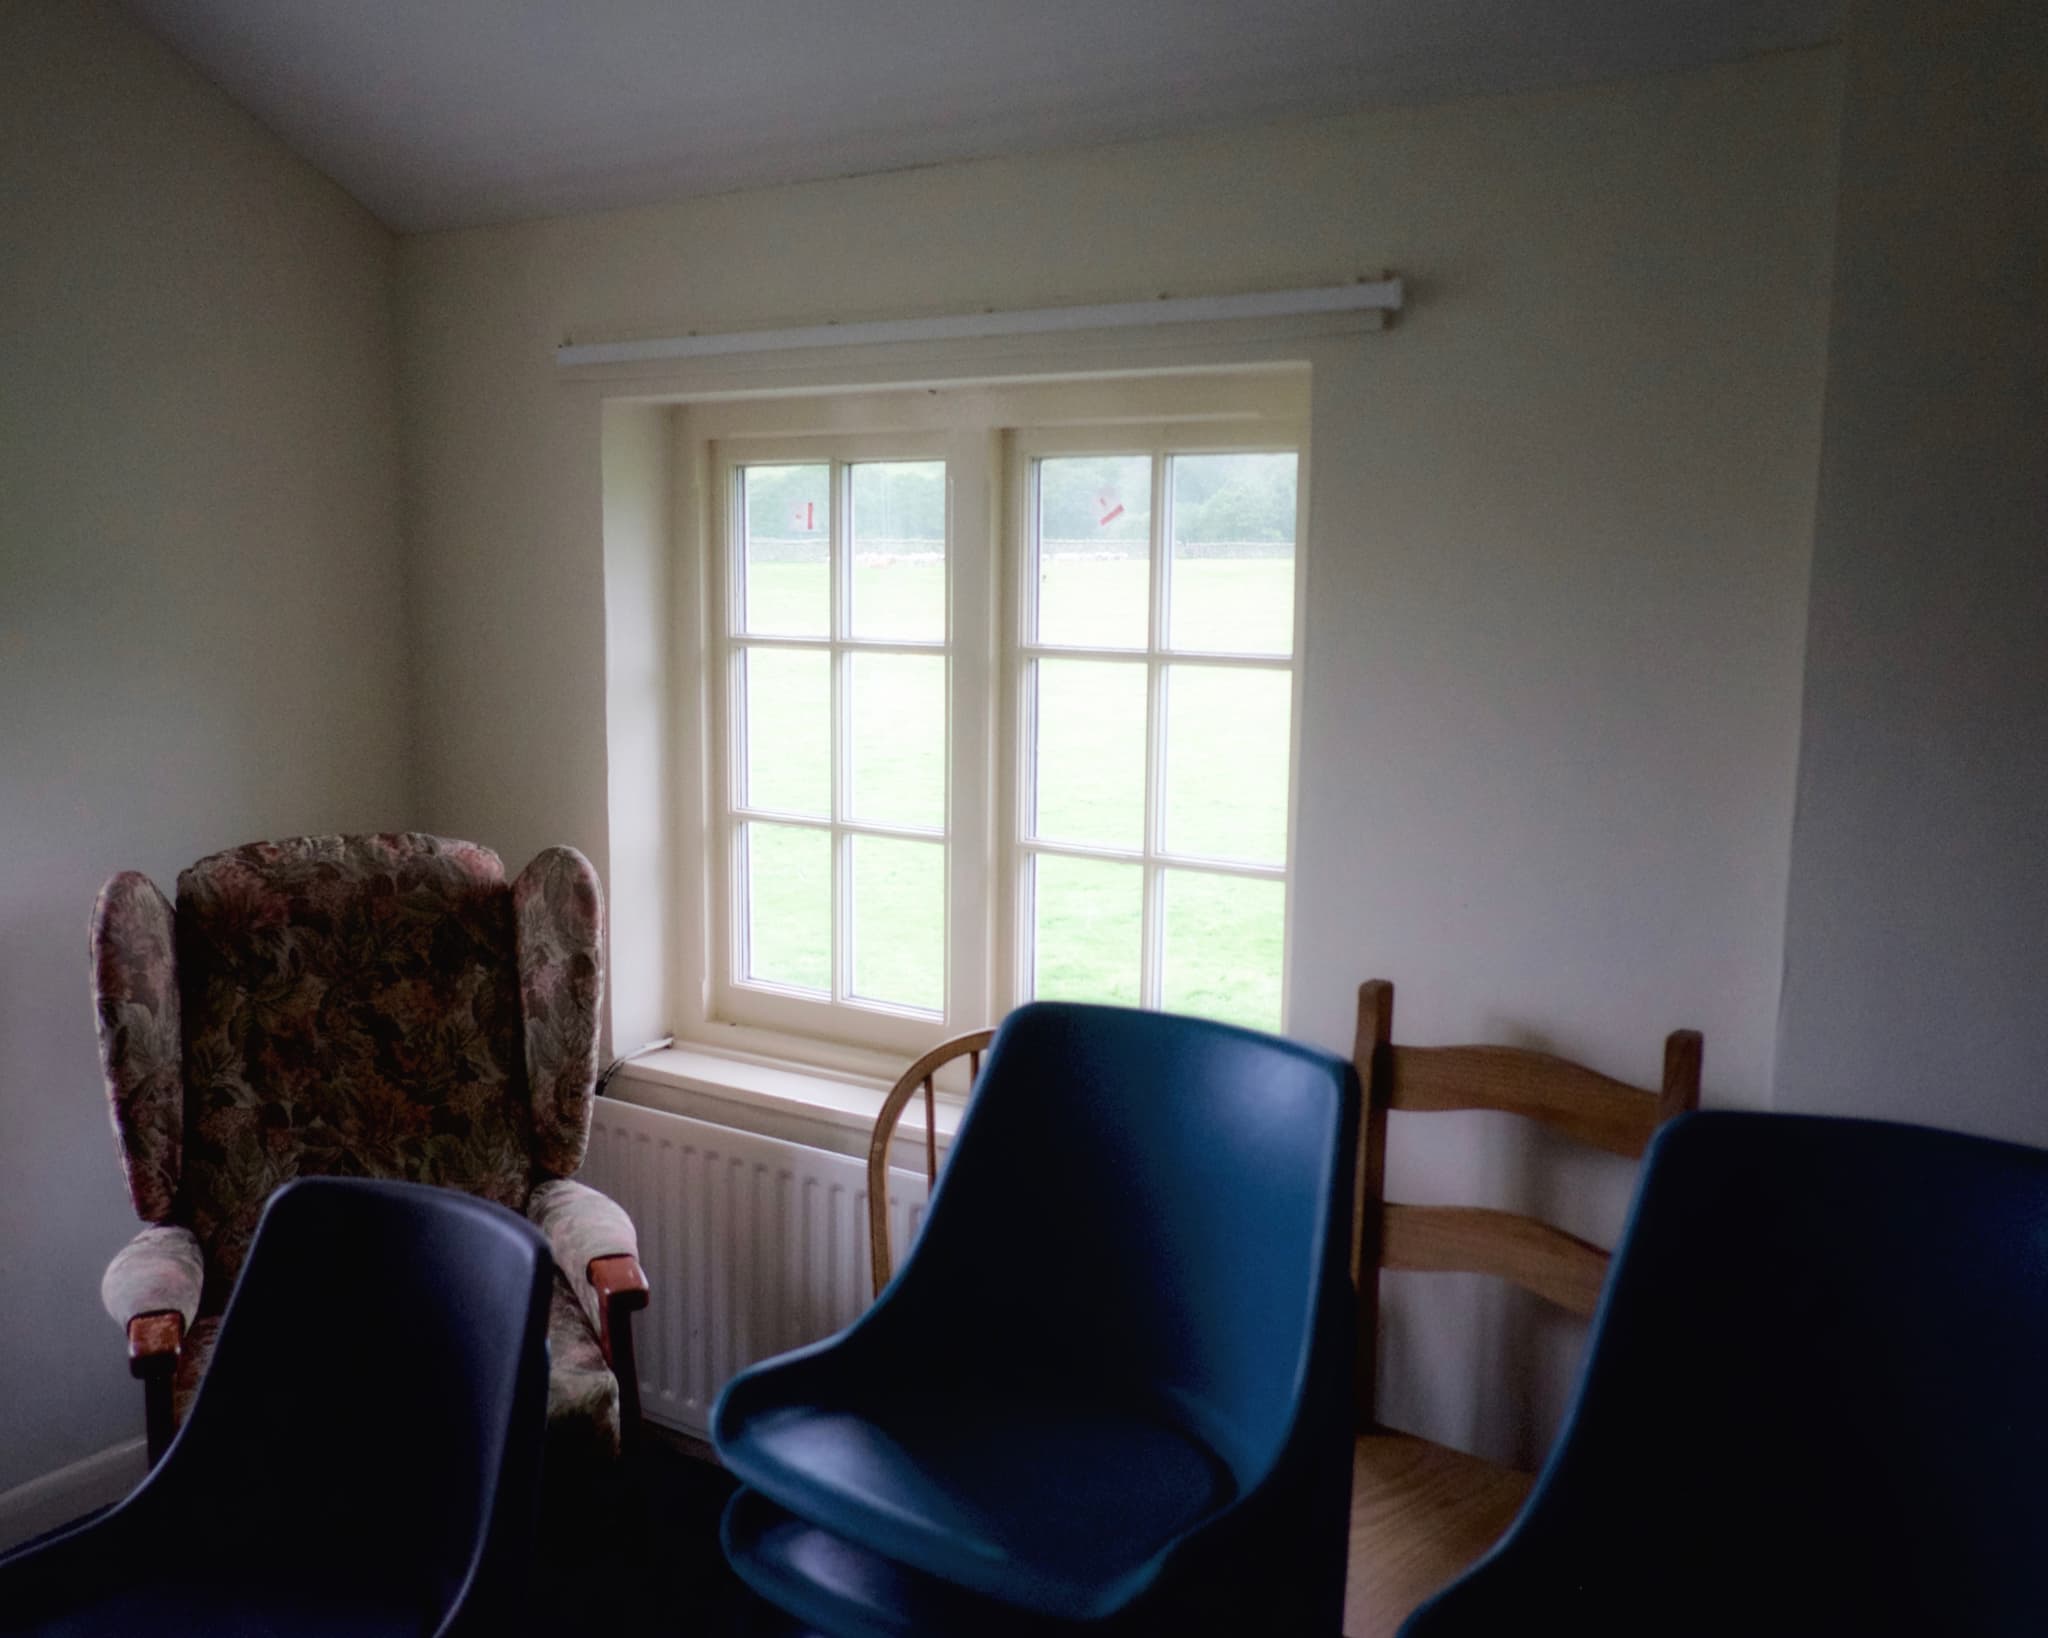 The meeting room of the Borrowdale Institute, commonly used by the Herdwick farmers